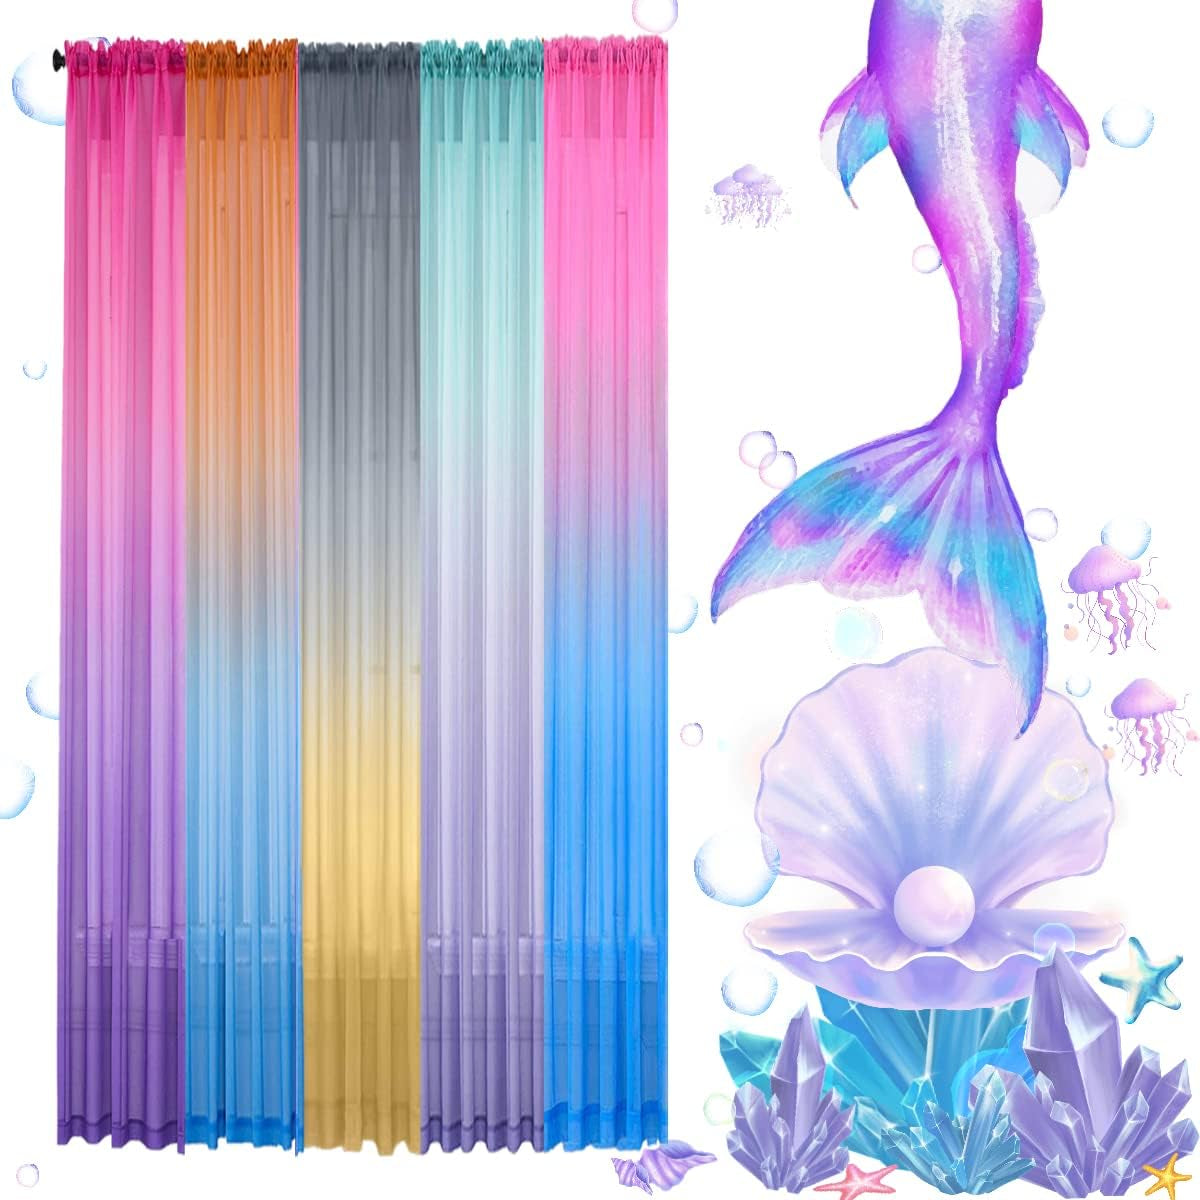 Yancorp 2 Panel Sets Semi Bedroom Curtains 63 Inch Length Sheer Rod Pocket Curtain Linen Teal Turquoise Purple Ombre Girls Living Room Mermaid Bedroom Nursery Kids Decor (Turquoise Purple, 40"X63")  Yancorp   